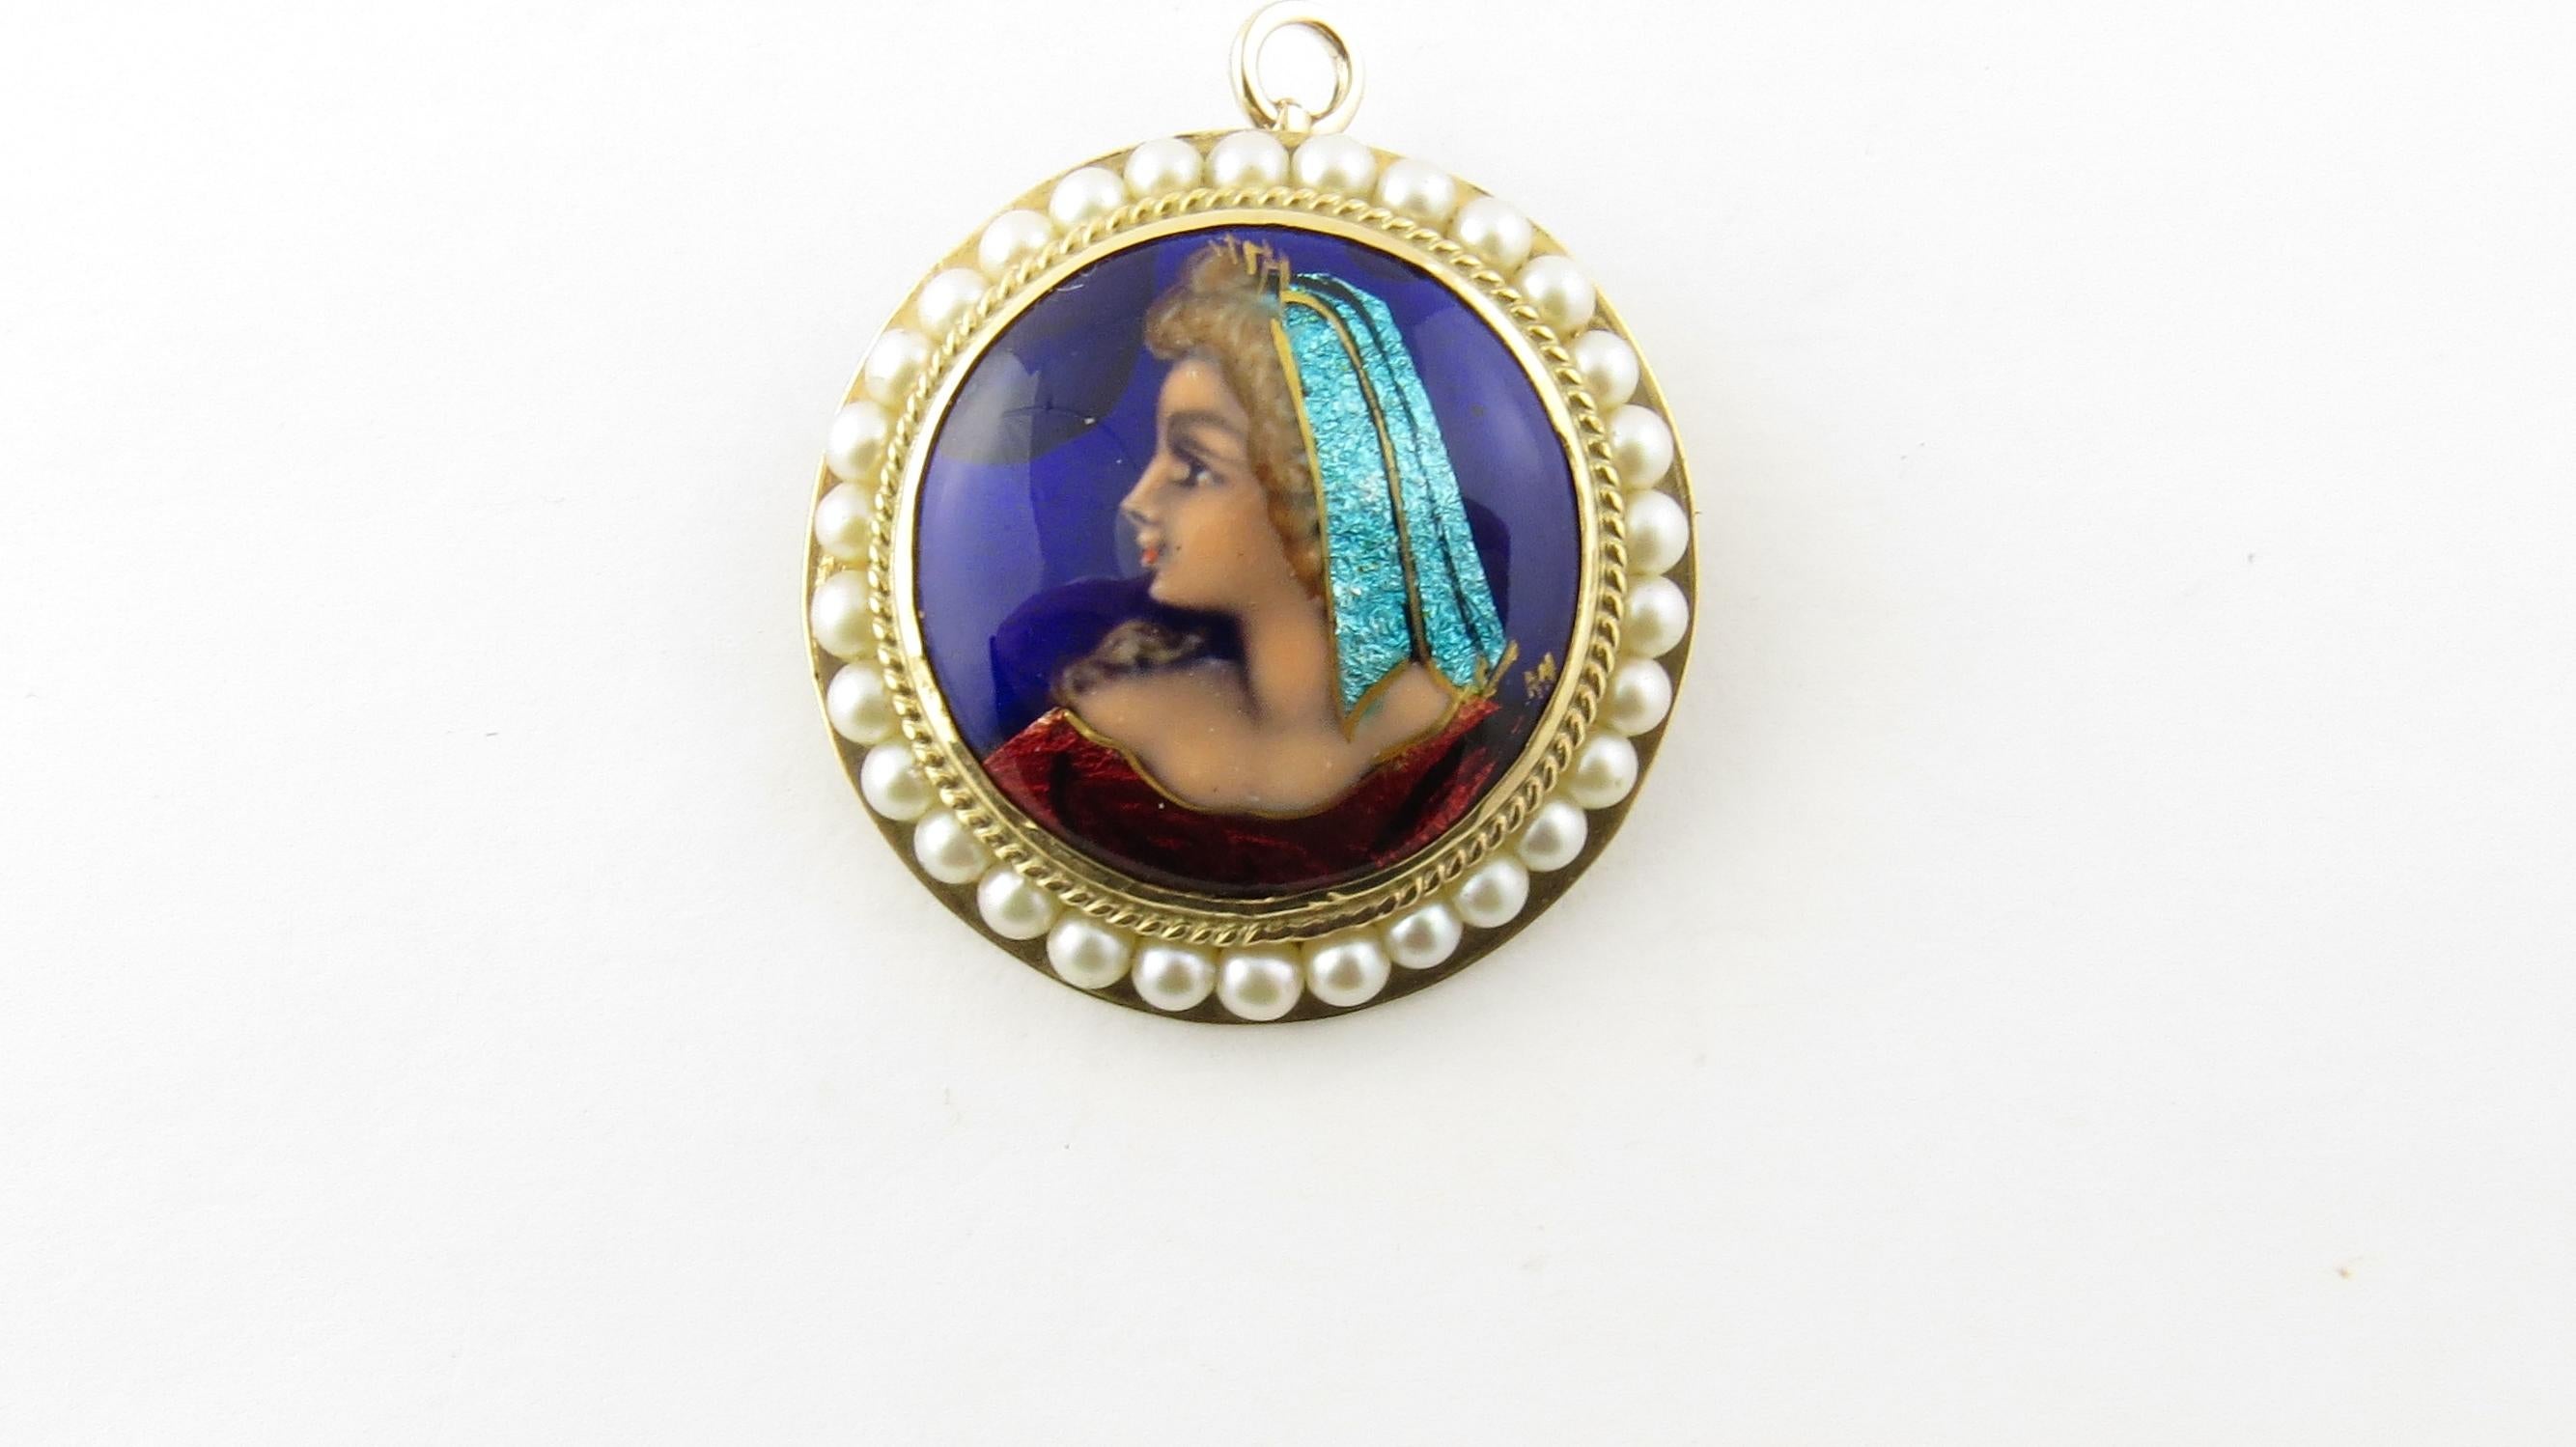 Women's 14 Karat Yellow Gold and Seed Pearl Painted Cameo Pendant / Brooch